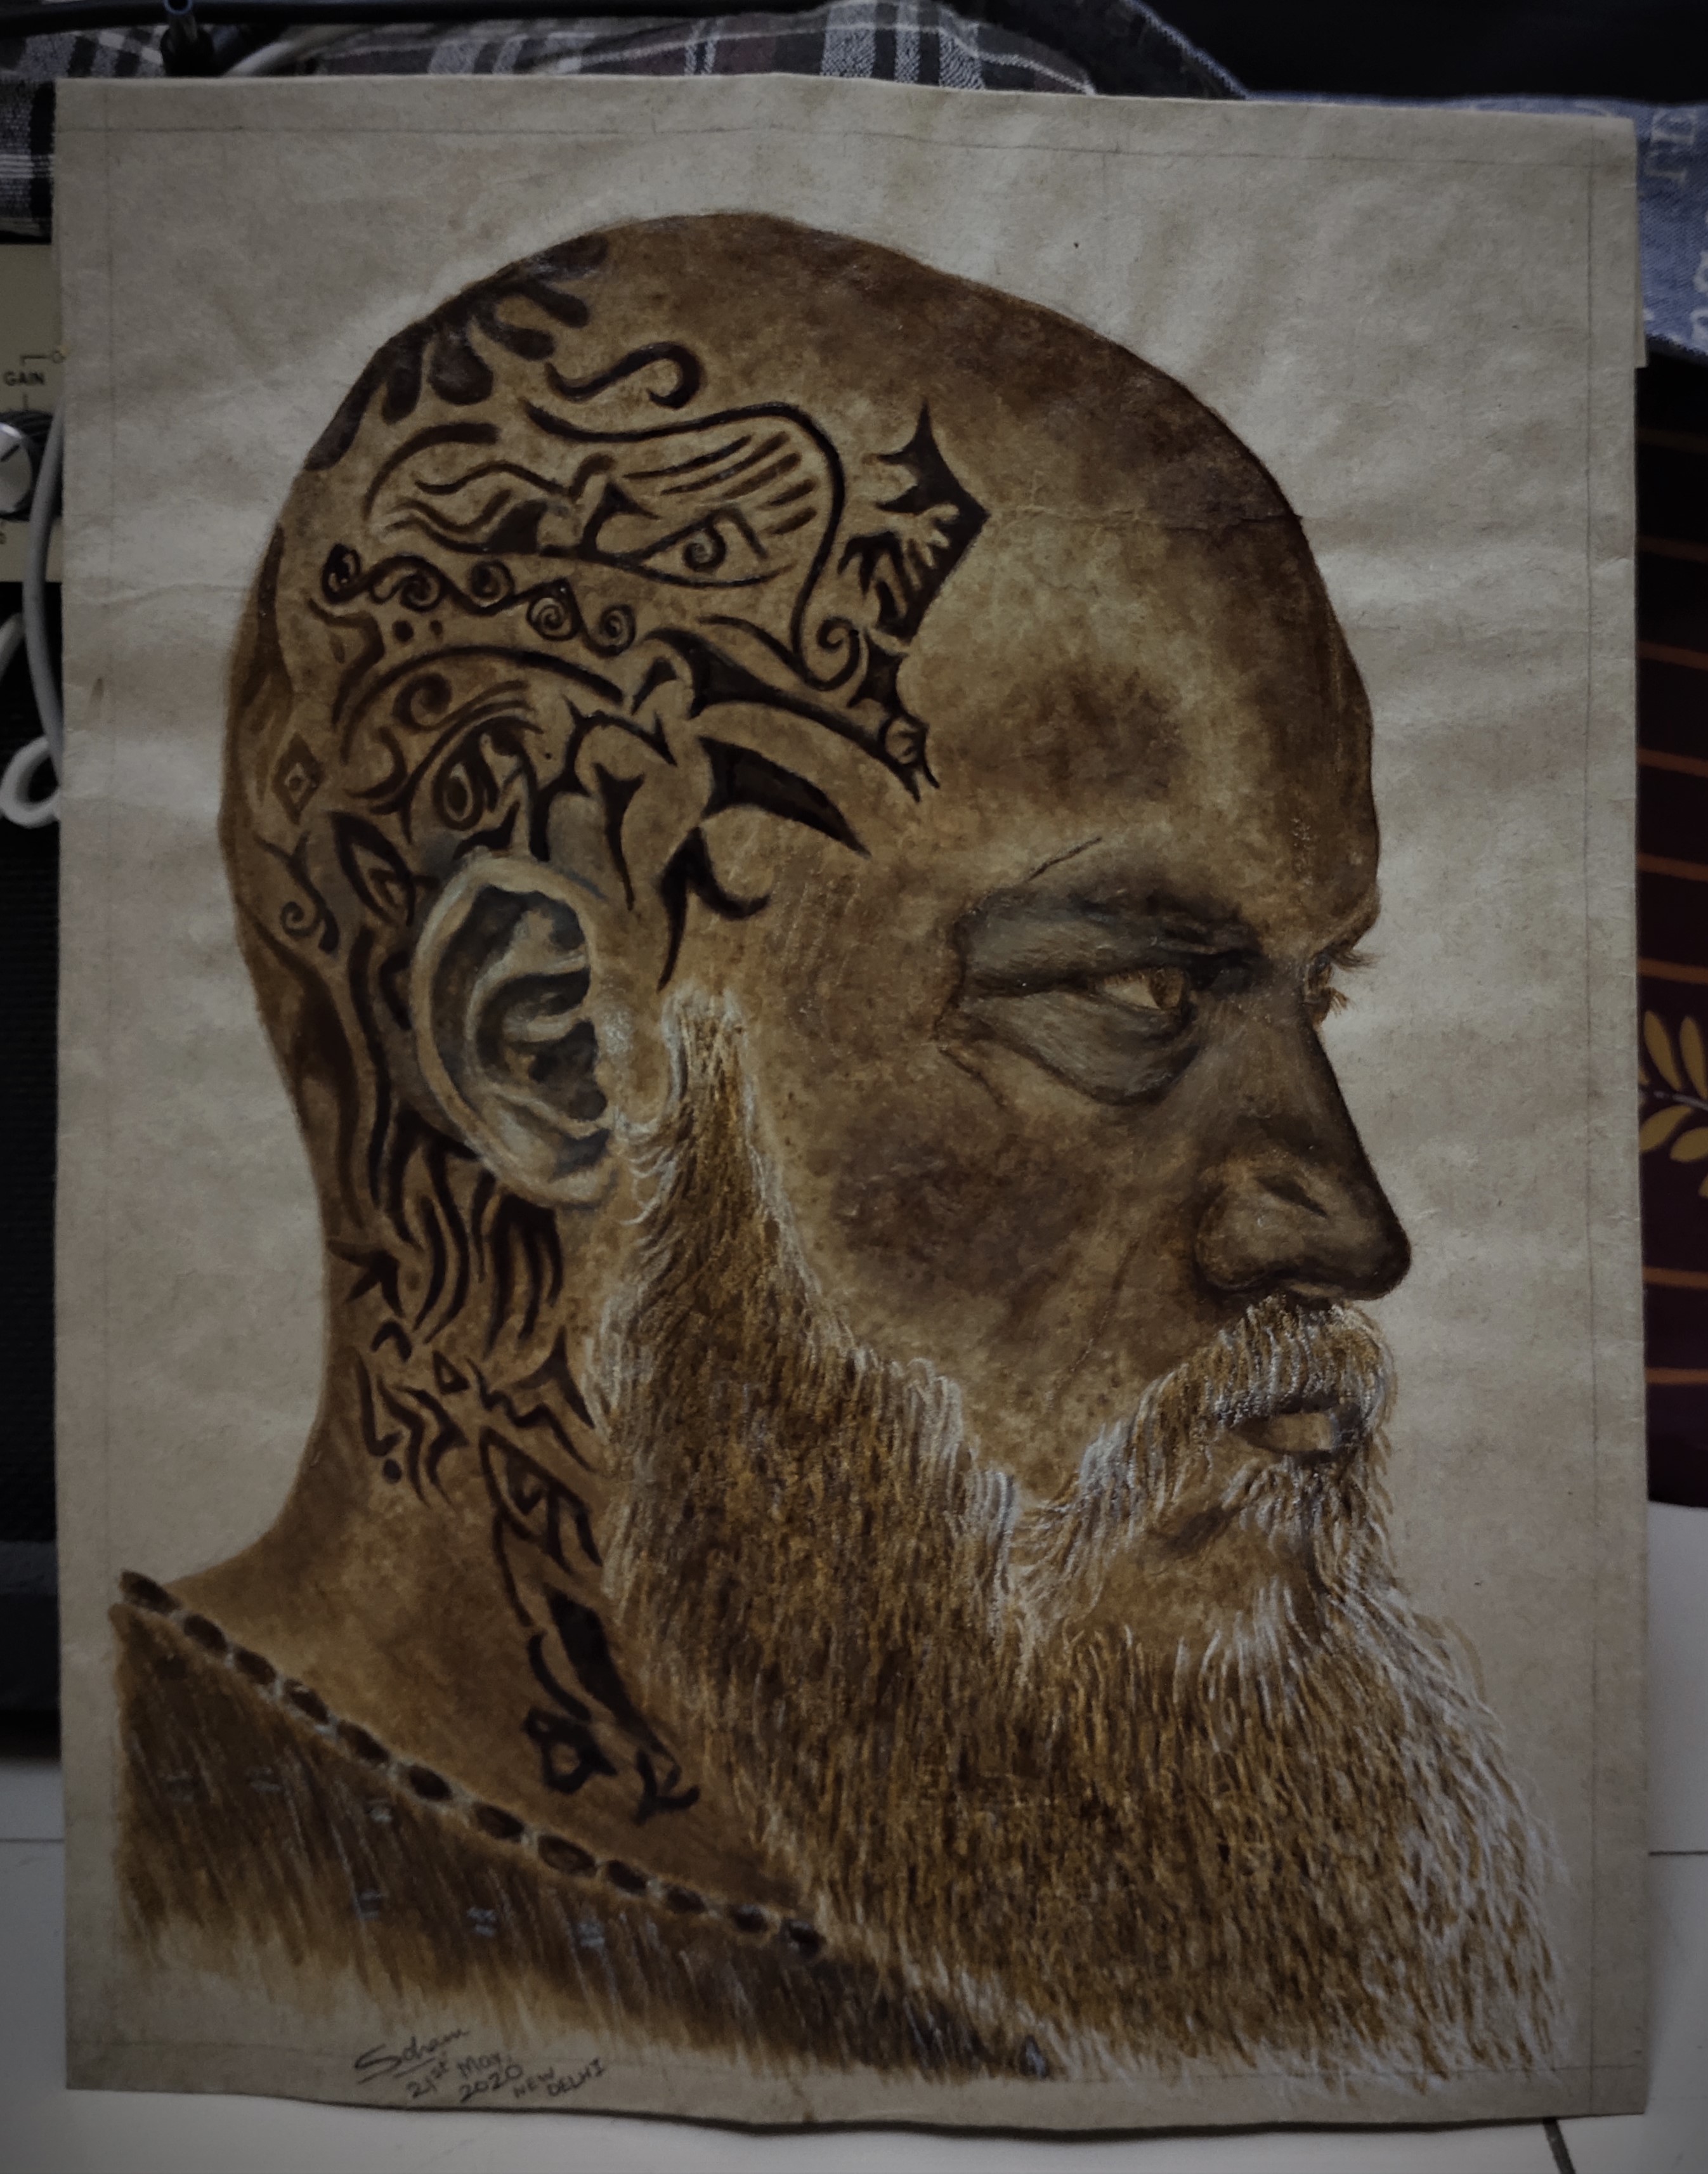 Coffee portrait of Ragnar Lothbrok, played by Travis Fimmel of Vikings fame. 